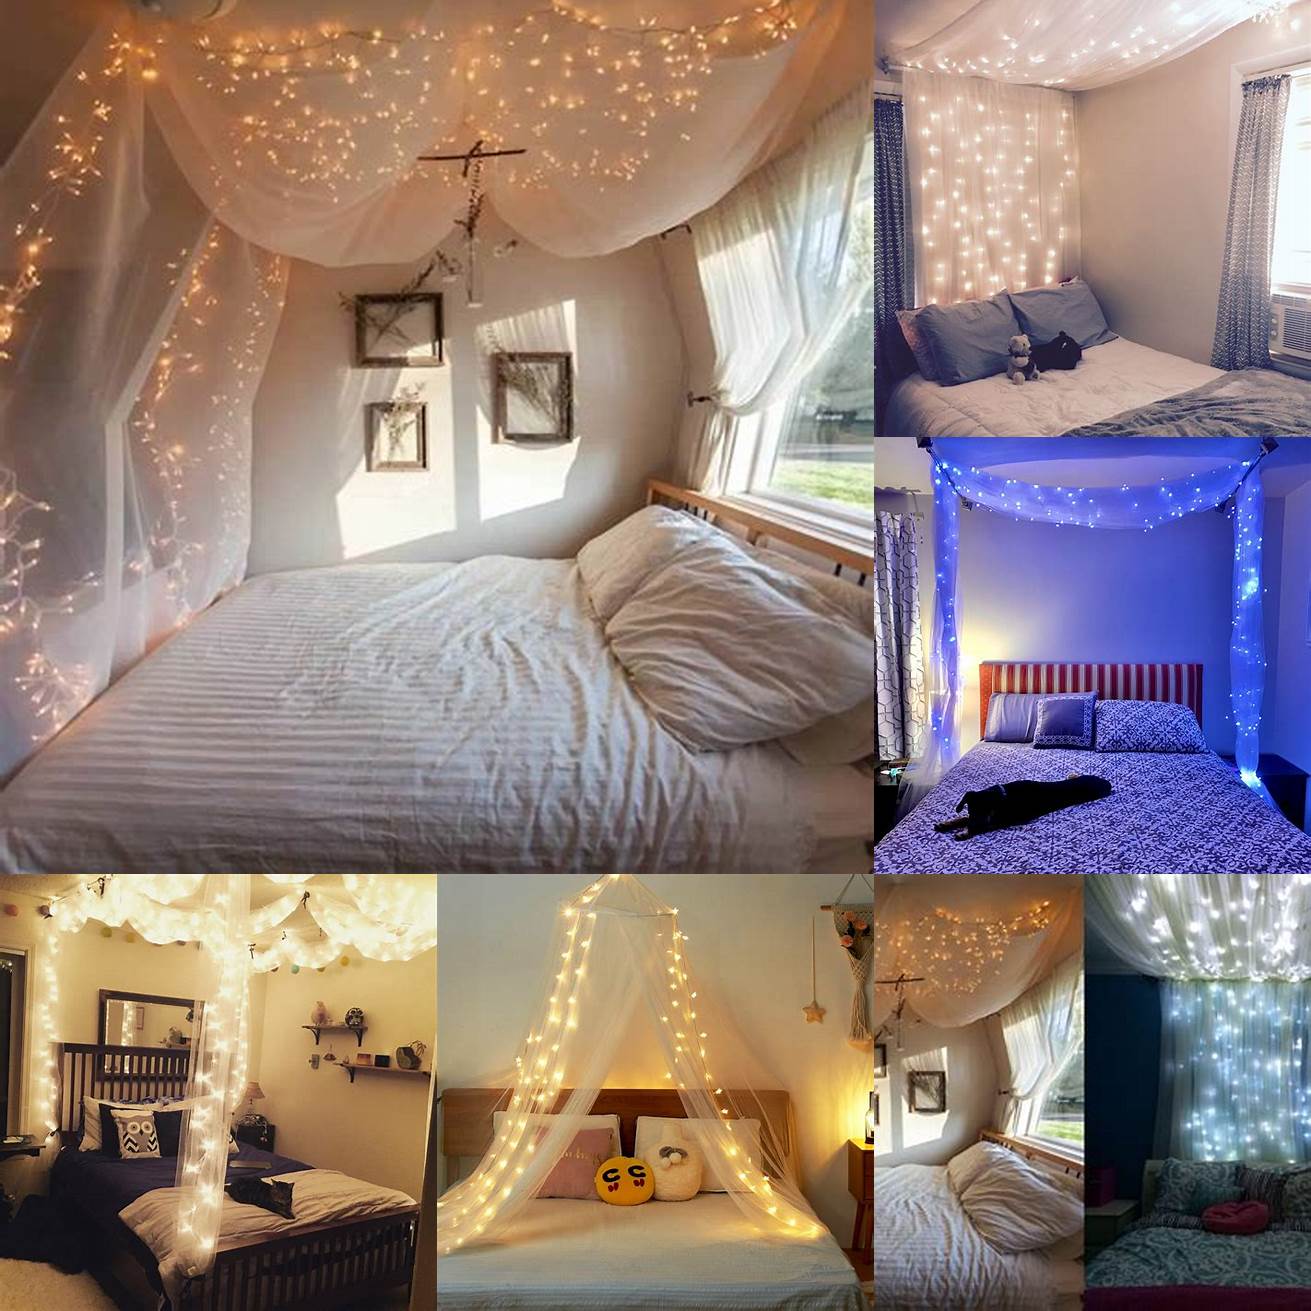 A bed without a headboard with a canopy and string lights